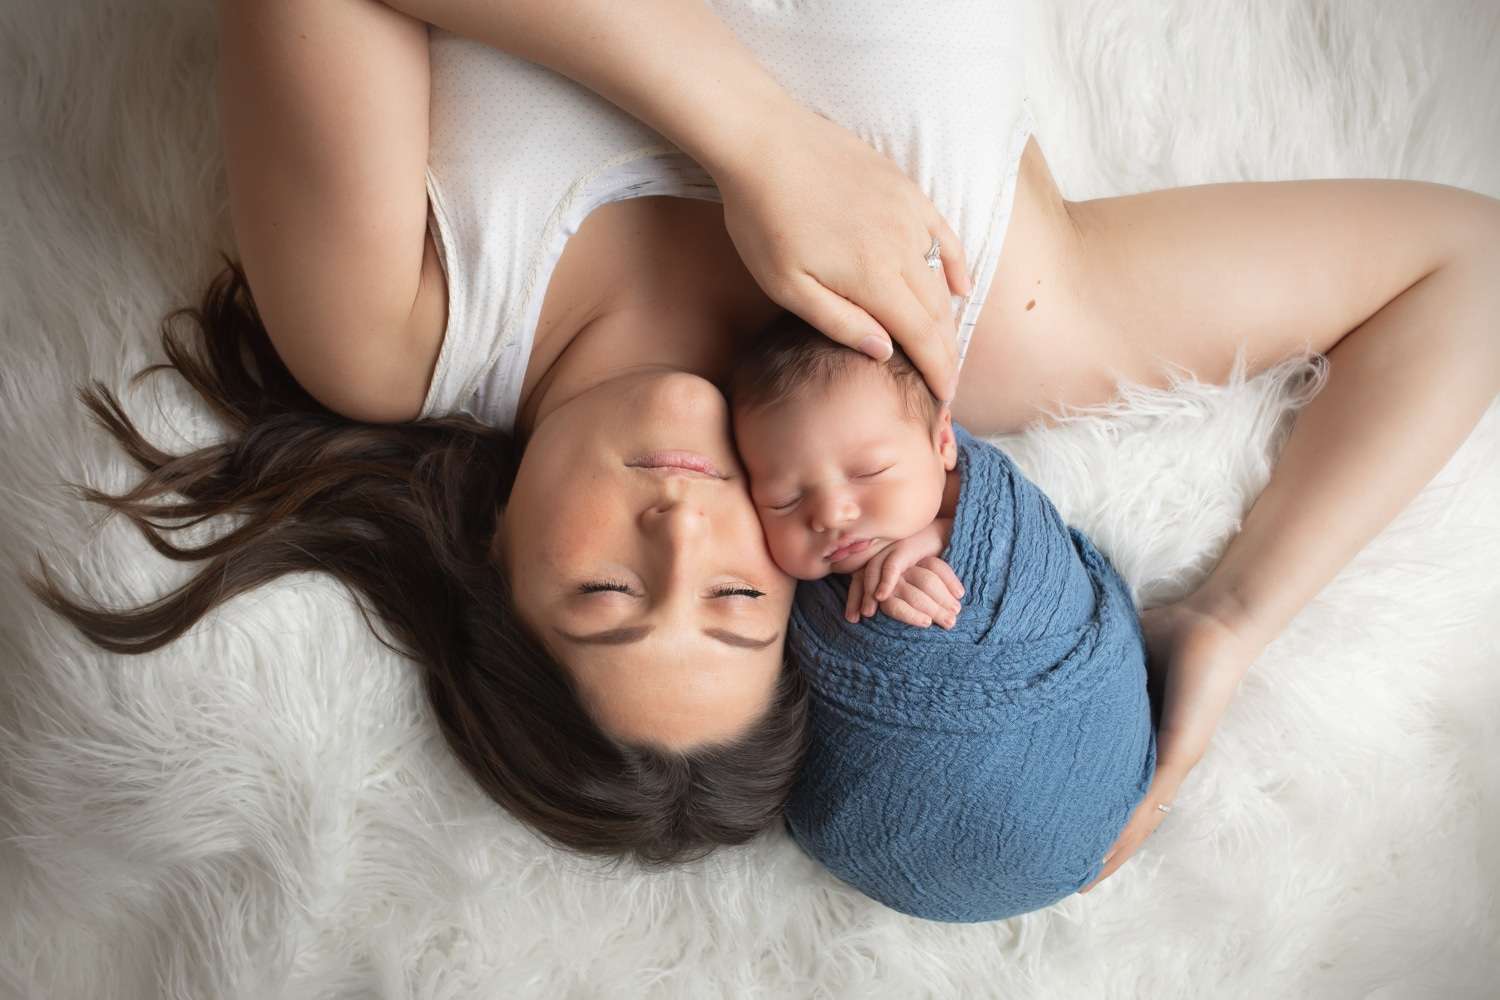 newborn photographer in rochester ny captures newborn baby boy sleeping in his mom's arms